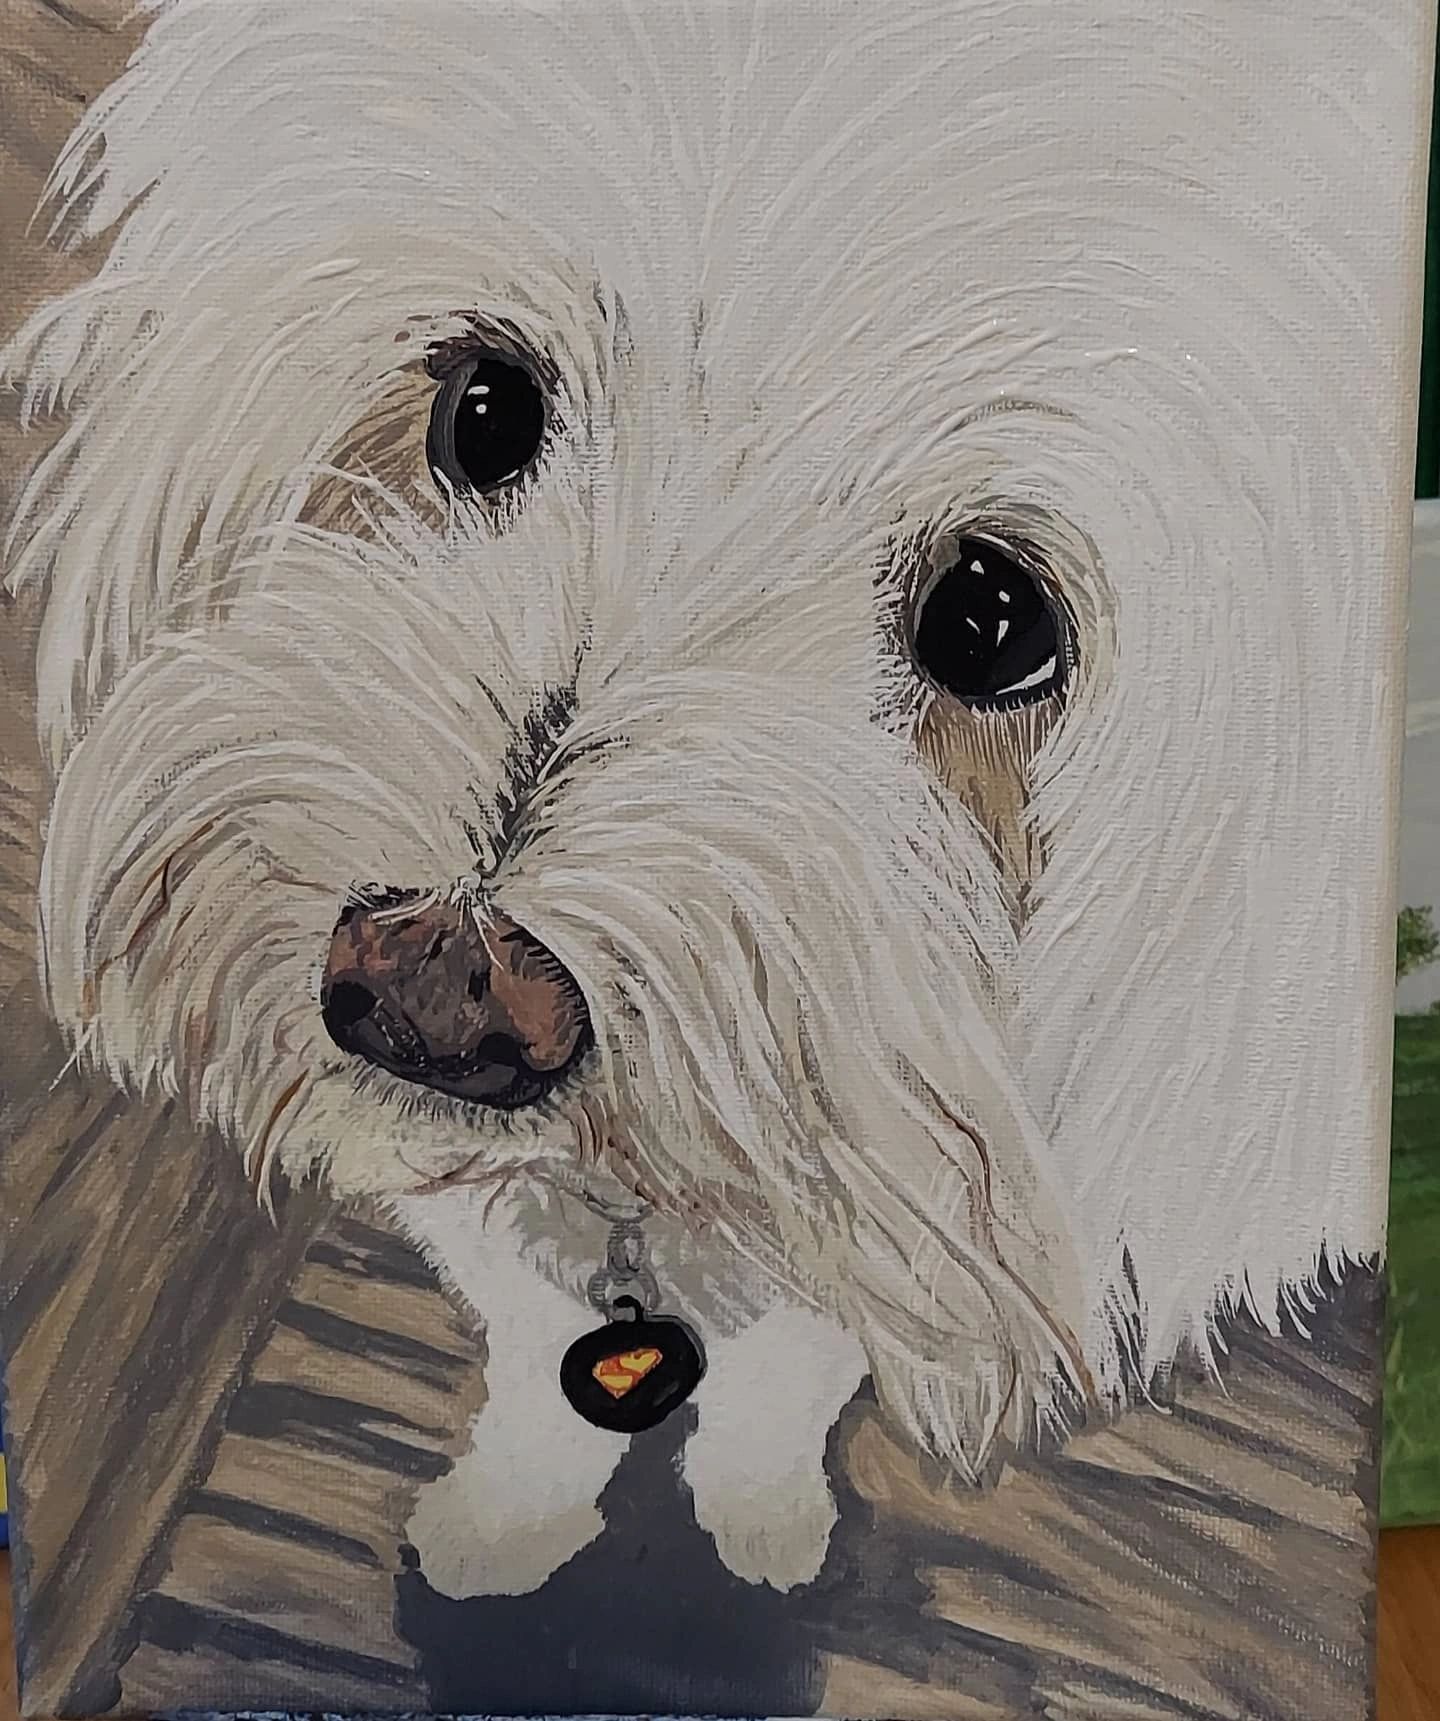 This is Harley. I love doing paintings of animals!